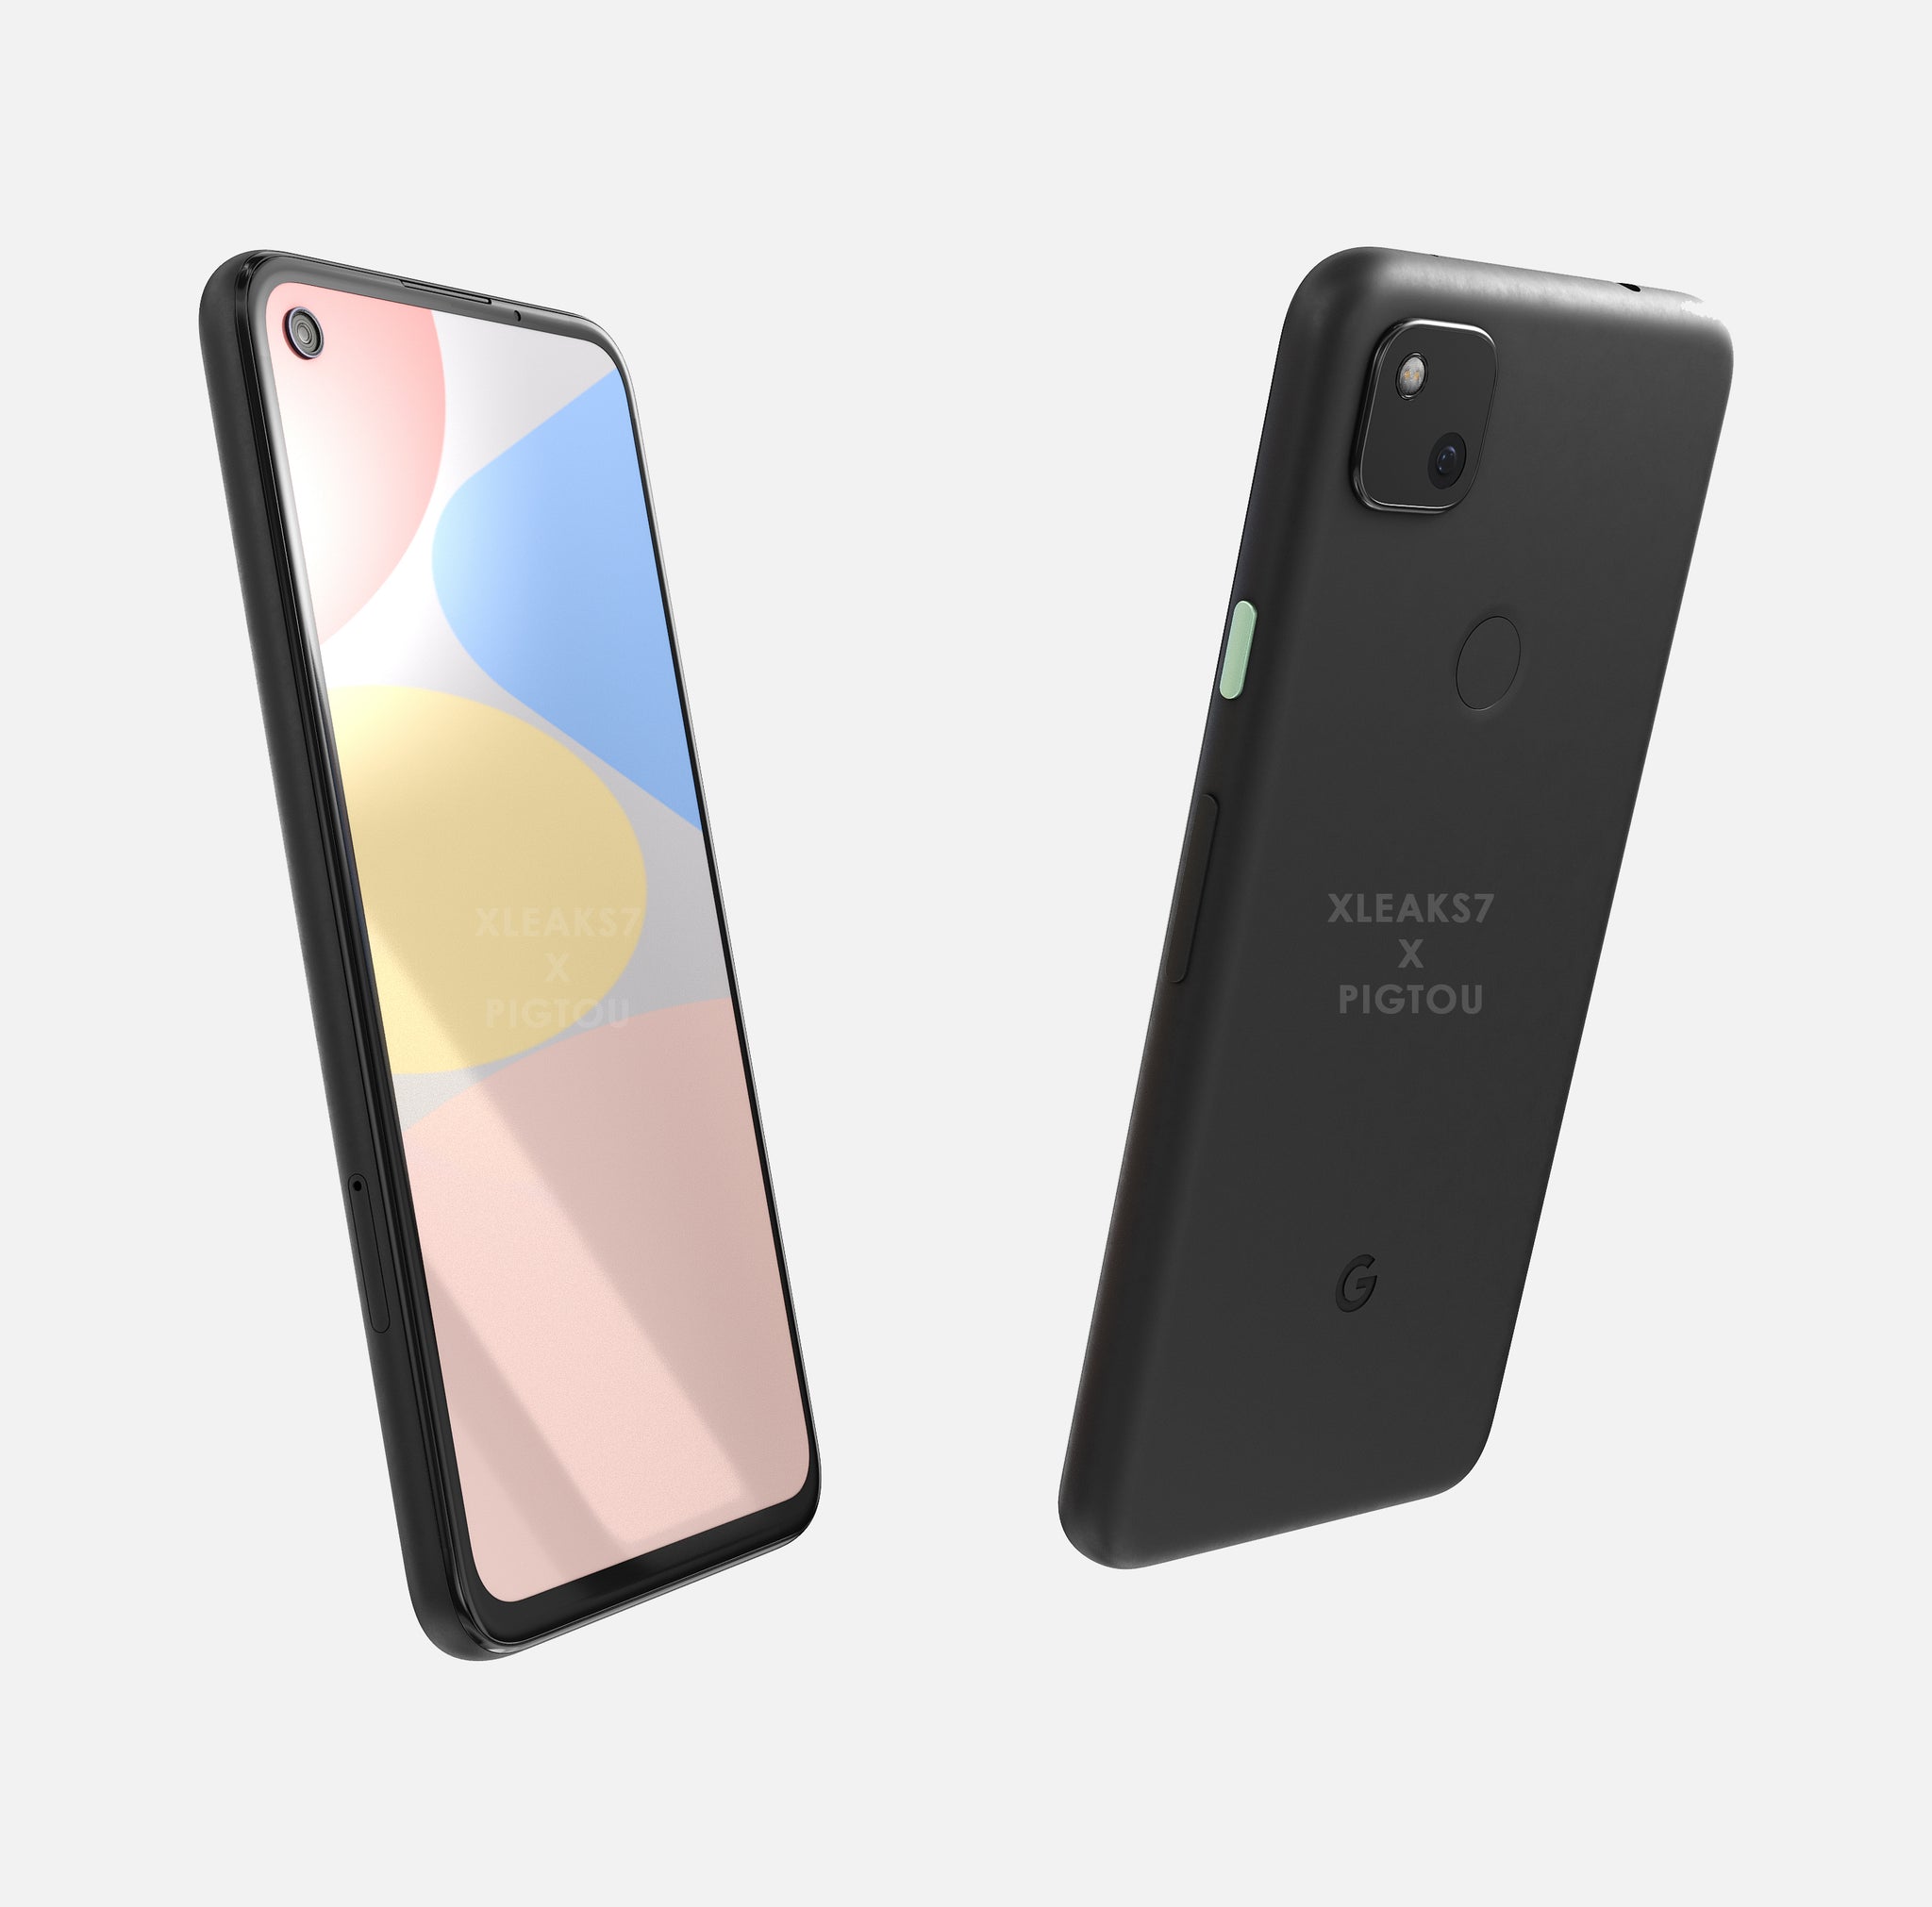 Leaked CAD renders of Google Pixel 4a confirm the complete design – Pigtou